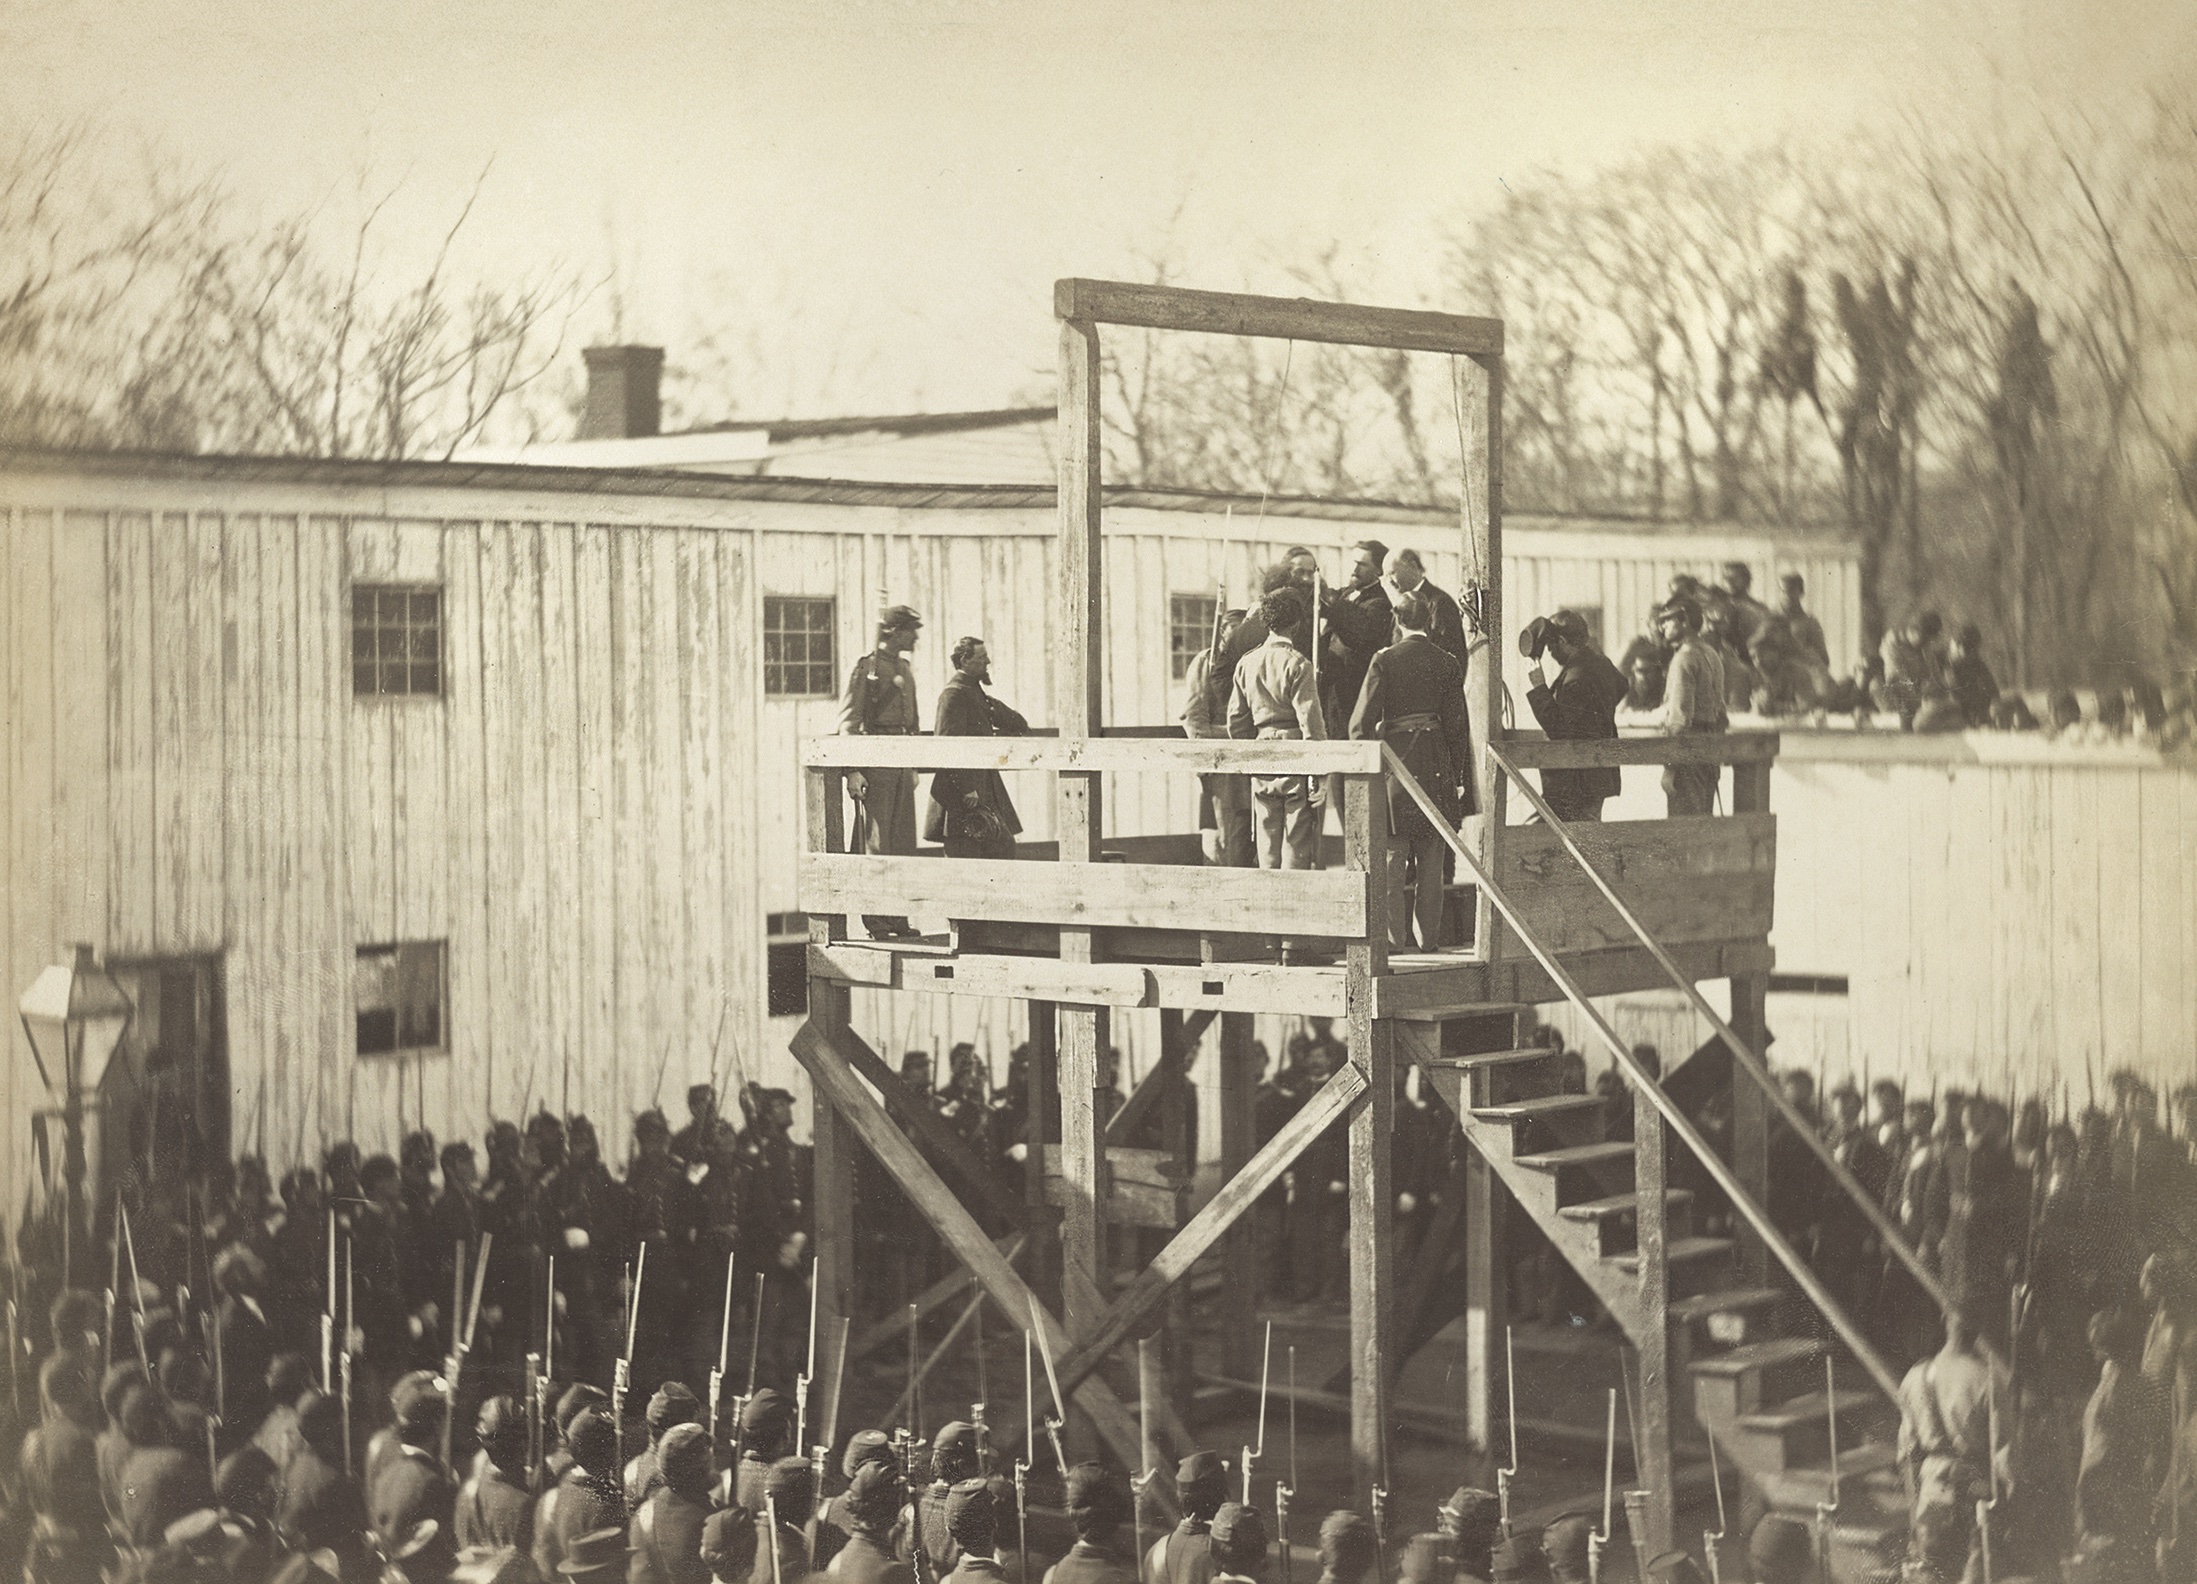 After the Civil War ended, Captain Henry Wirz, the prison’s commandant, was tried and convicted of murder by a military tribunal. On November 10, 1865, Wirz was hanged in Washington, D.C. (Library of Congress)